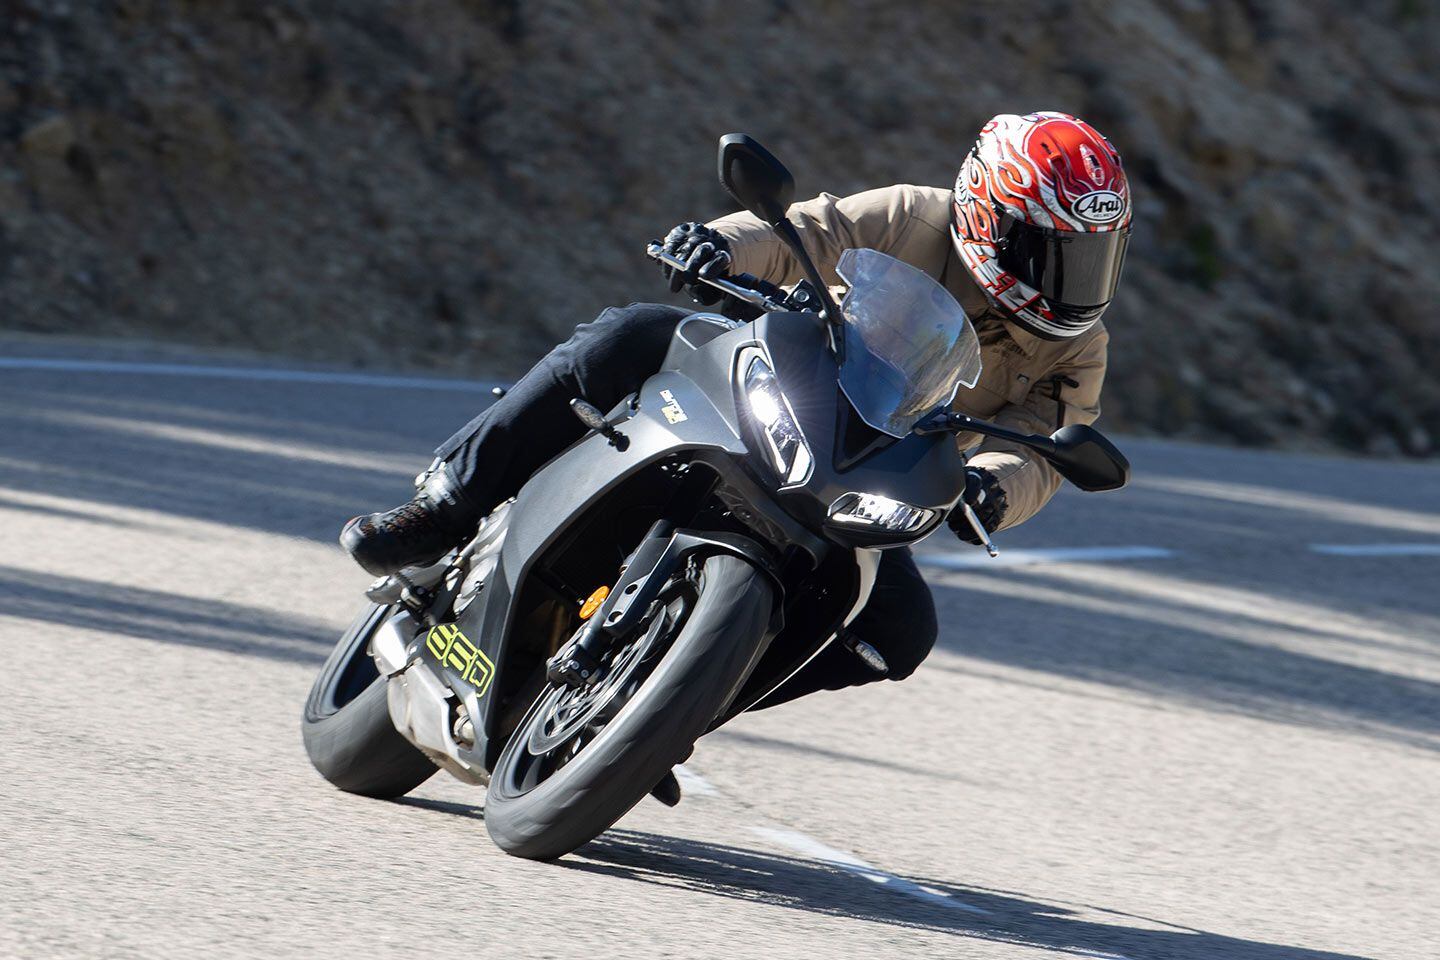 The Triumph triple provides a great combination of low-down torque and top-end power.